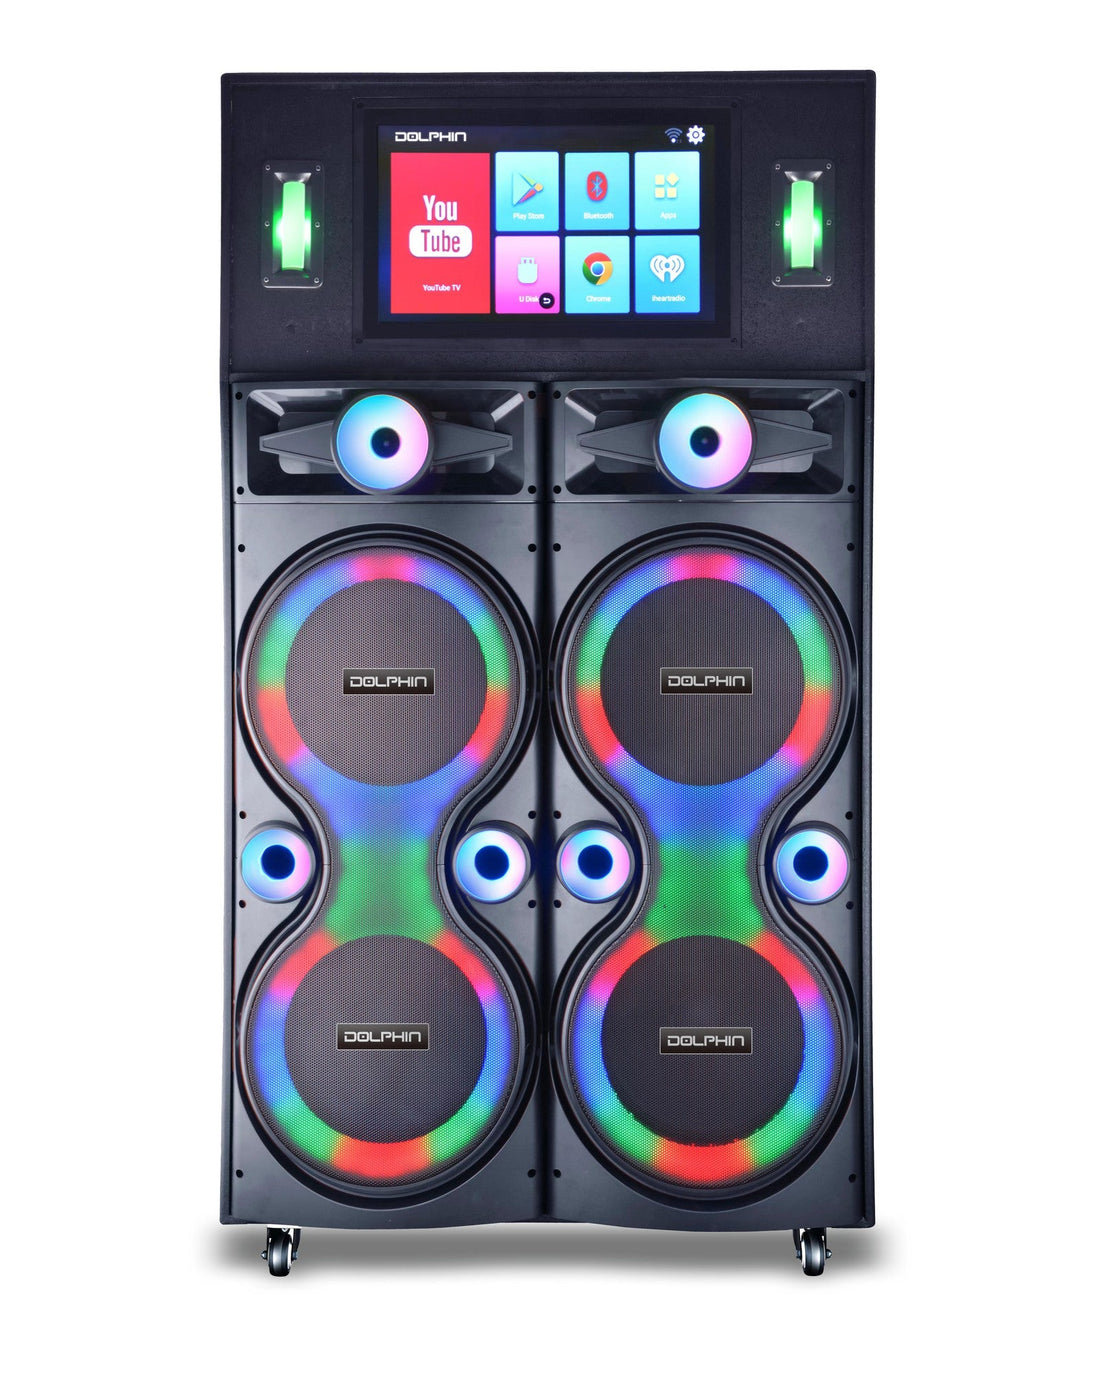 Dolphin XL-4120 Quad 12&quot; Karaoke Machine | Lyrics Display Screen, 18.5&quot; Tablet, WiFi, Bluetooth Speaker | 2 Rechargeable UHF Wireless Mics | Singing Party, Live Streaming, Voice Modulation - Top ElectrosKaraoke SystemXL-4120810059431805